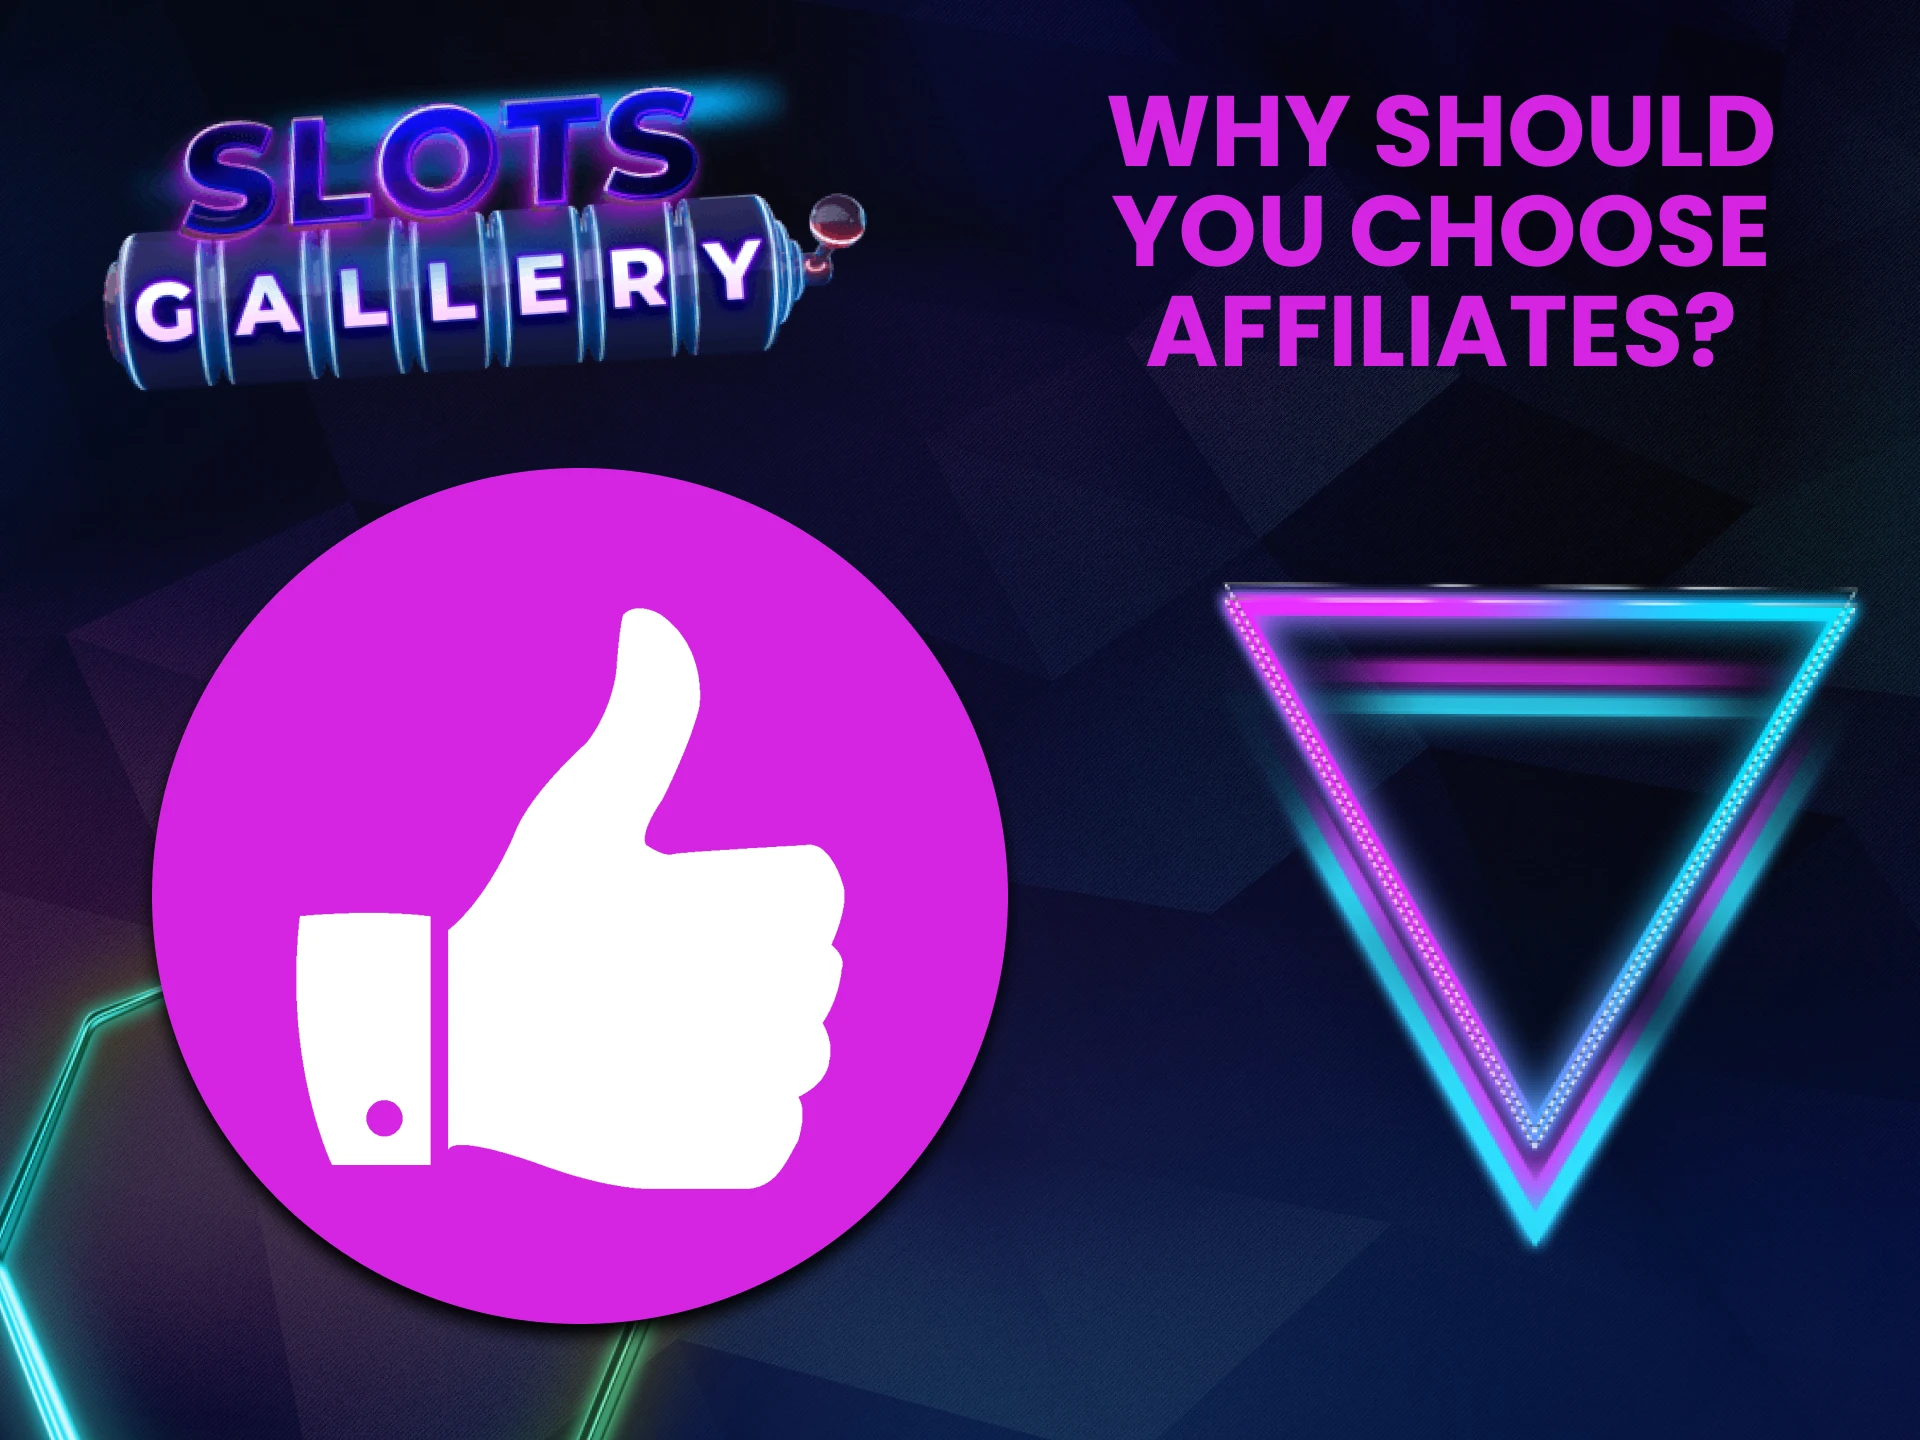 We will tell you why you choose the affiliate program from Slots Gallery.